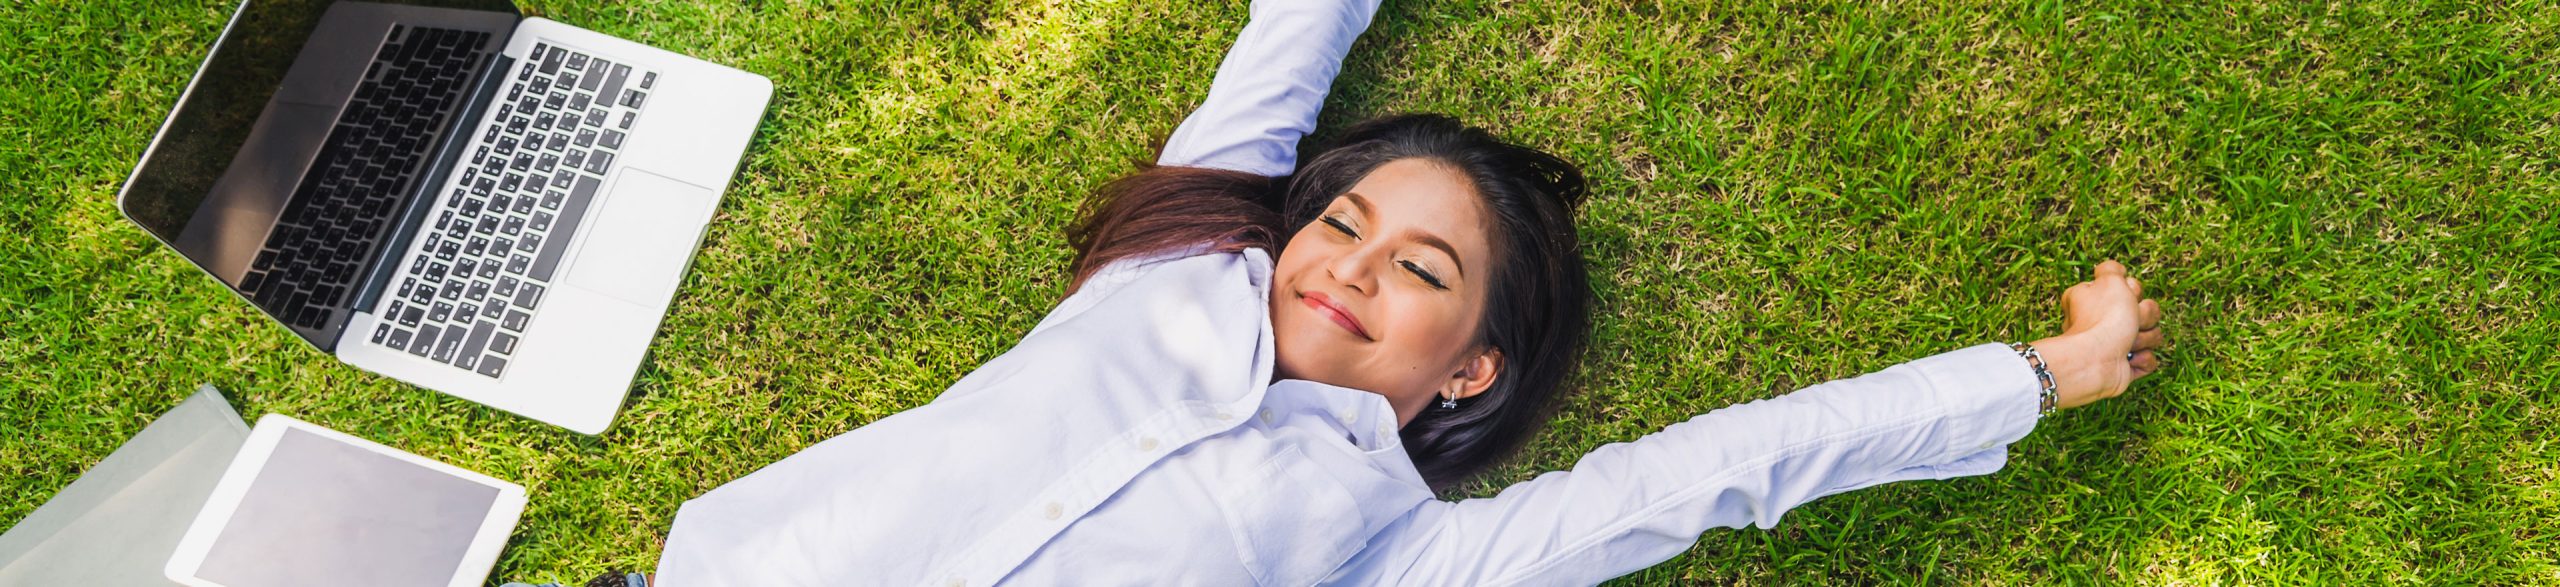 image: woman in casual wear laying down on grass and relaxing after finished work with laptop